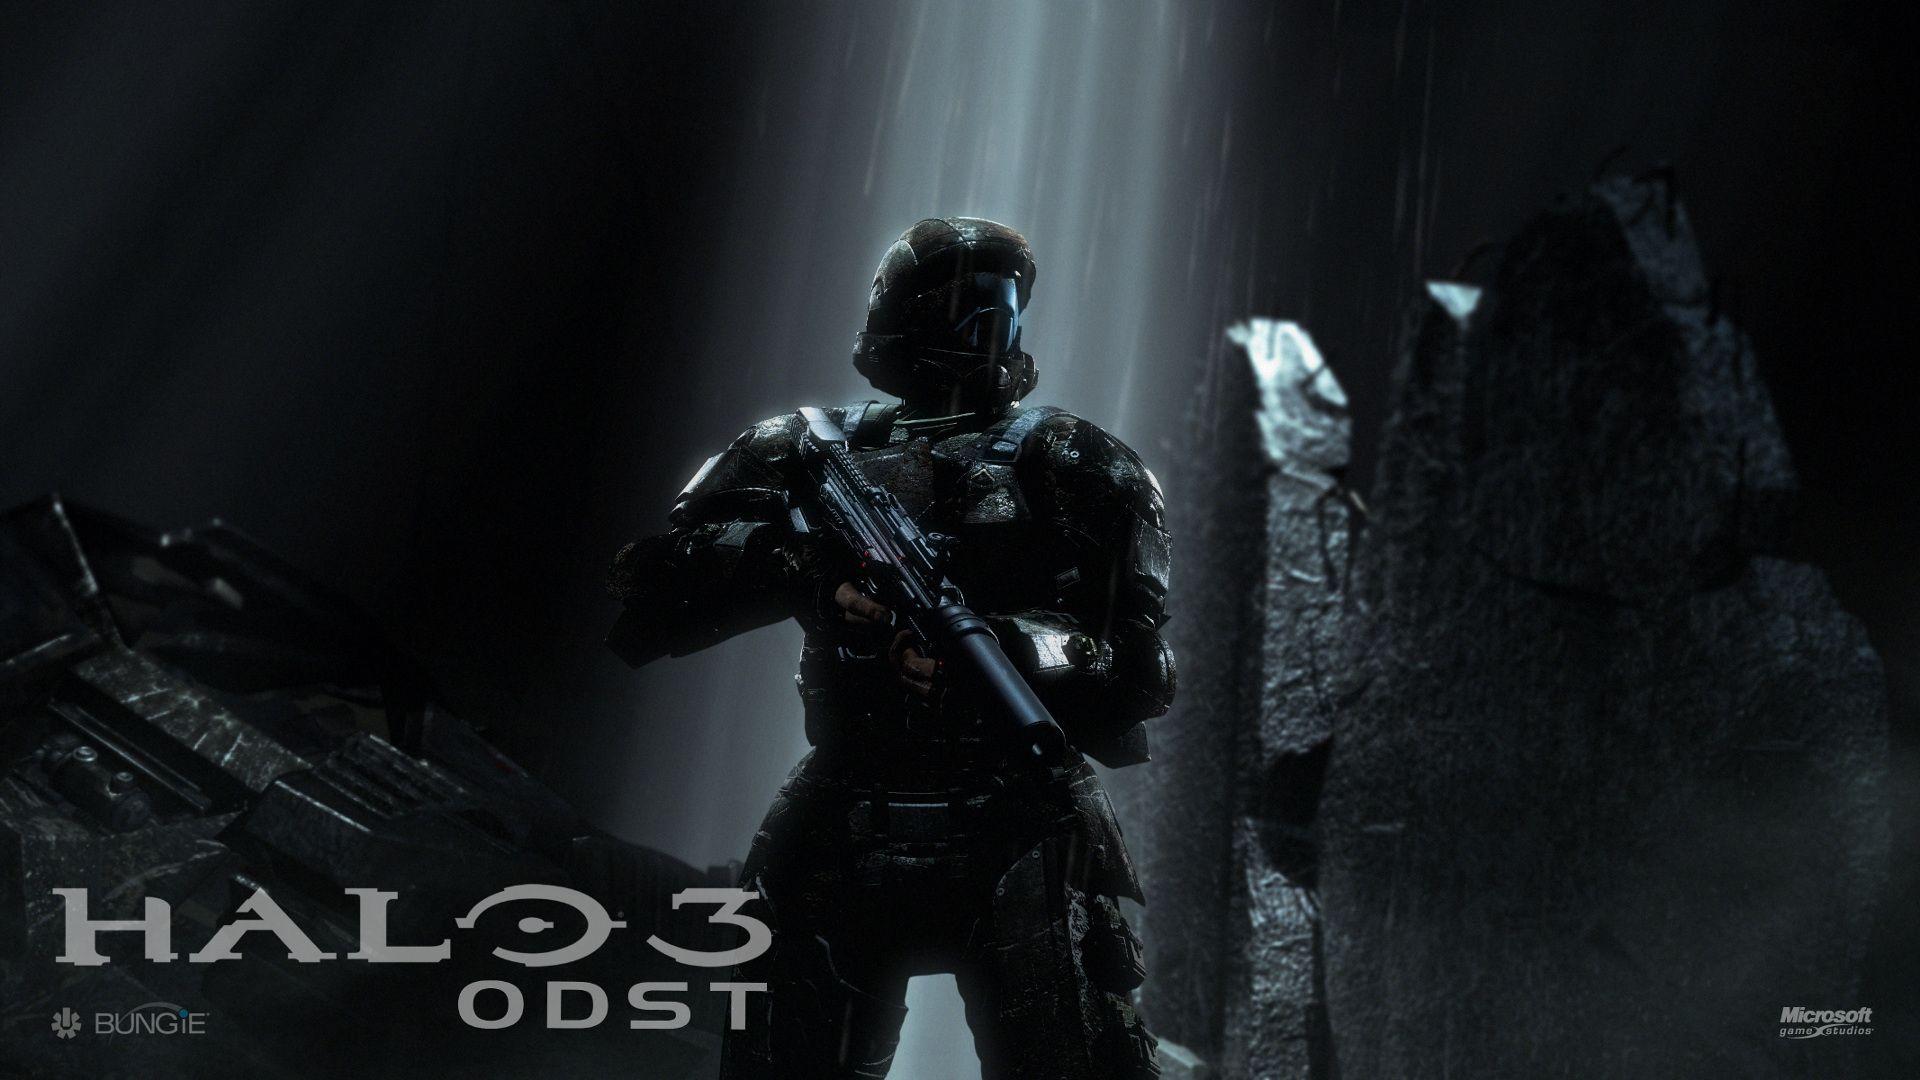 High Resolution Halo 3 Odst Wallpaper HD 4 Game Full Size